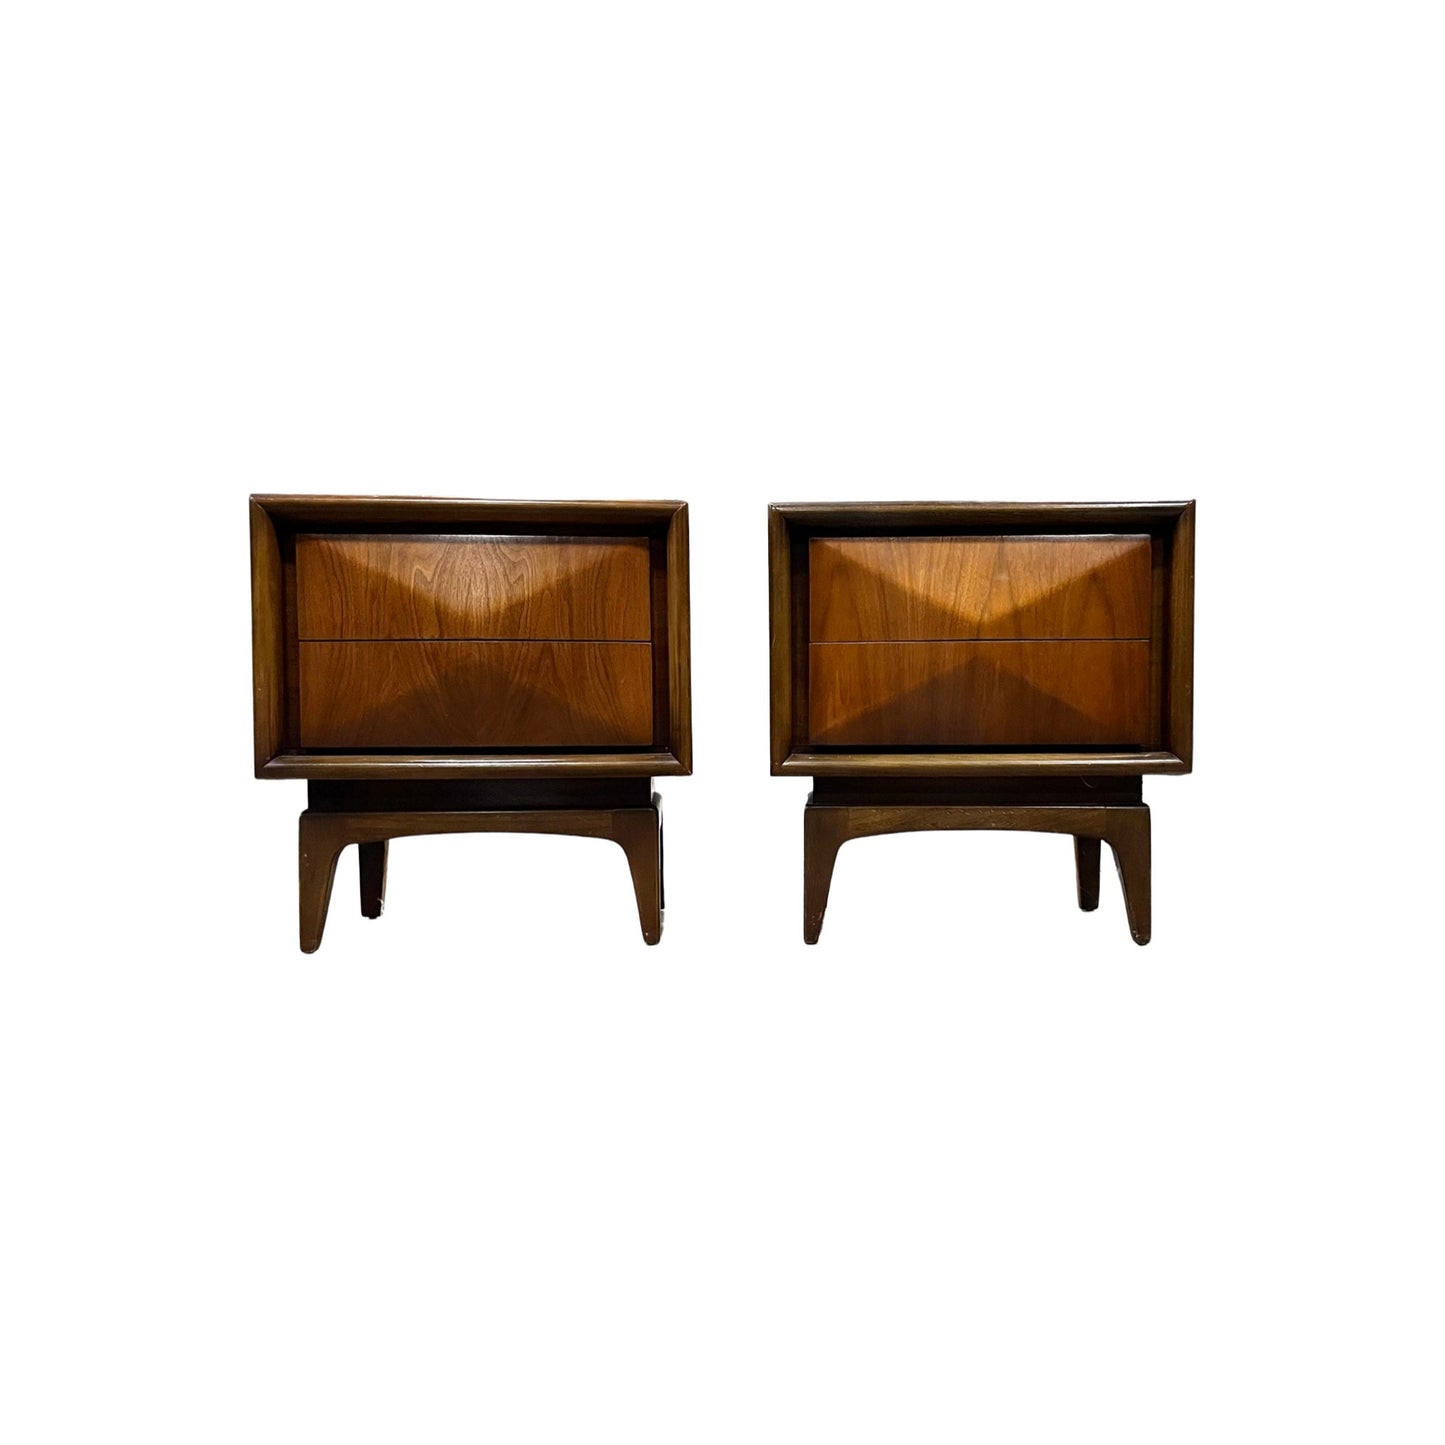 Rich Walnut Veneer and Solid Wood Construction - United Furniture Co. Mid Century Modern Pair of Nighstands